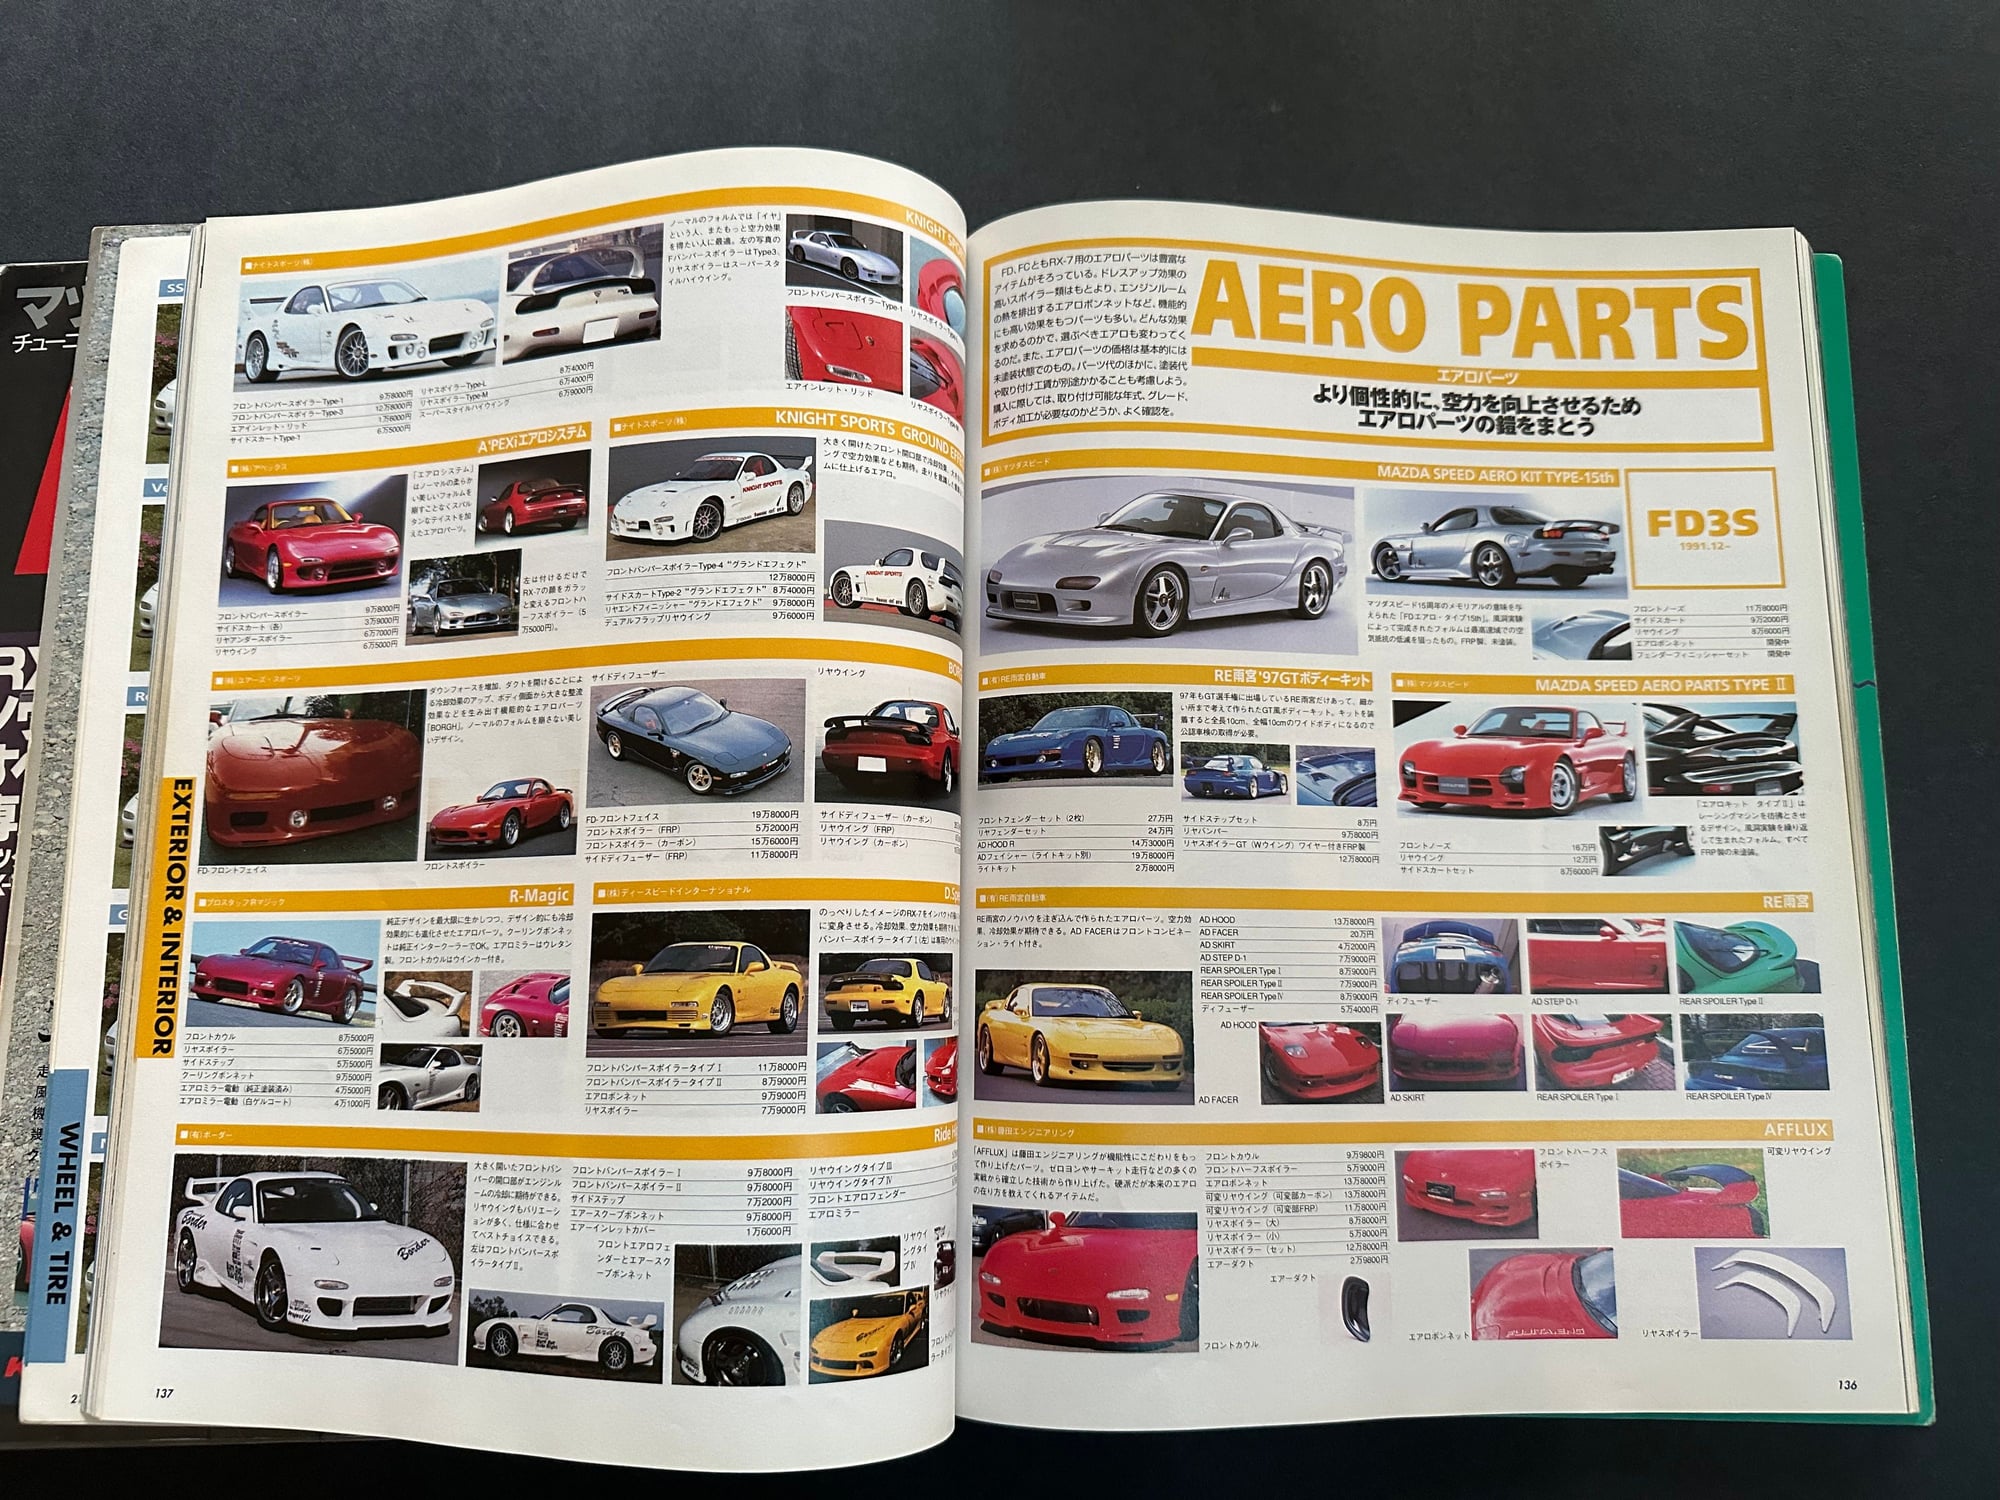 Miscellaneous - HYPERREV ISSUE #23 (RX7 iSSUE #2) TUNER Compendium - Used - 1991 to 2003 Mazda RX-7 - Richmond, BC V7C2R2, Canada